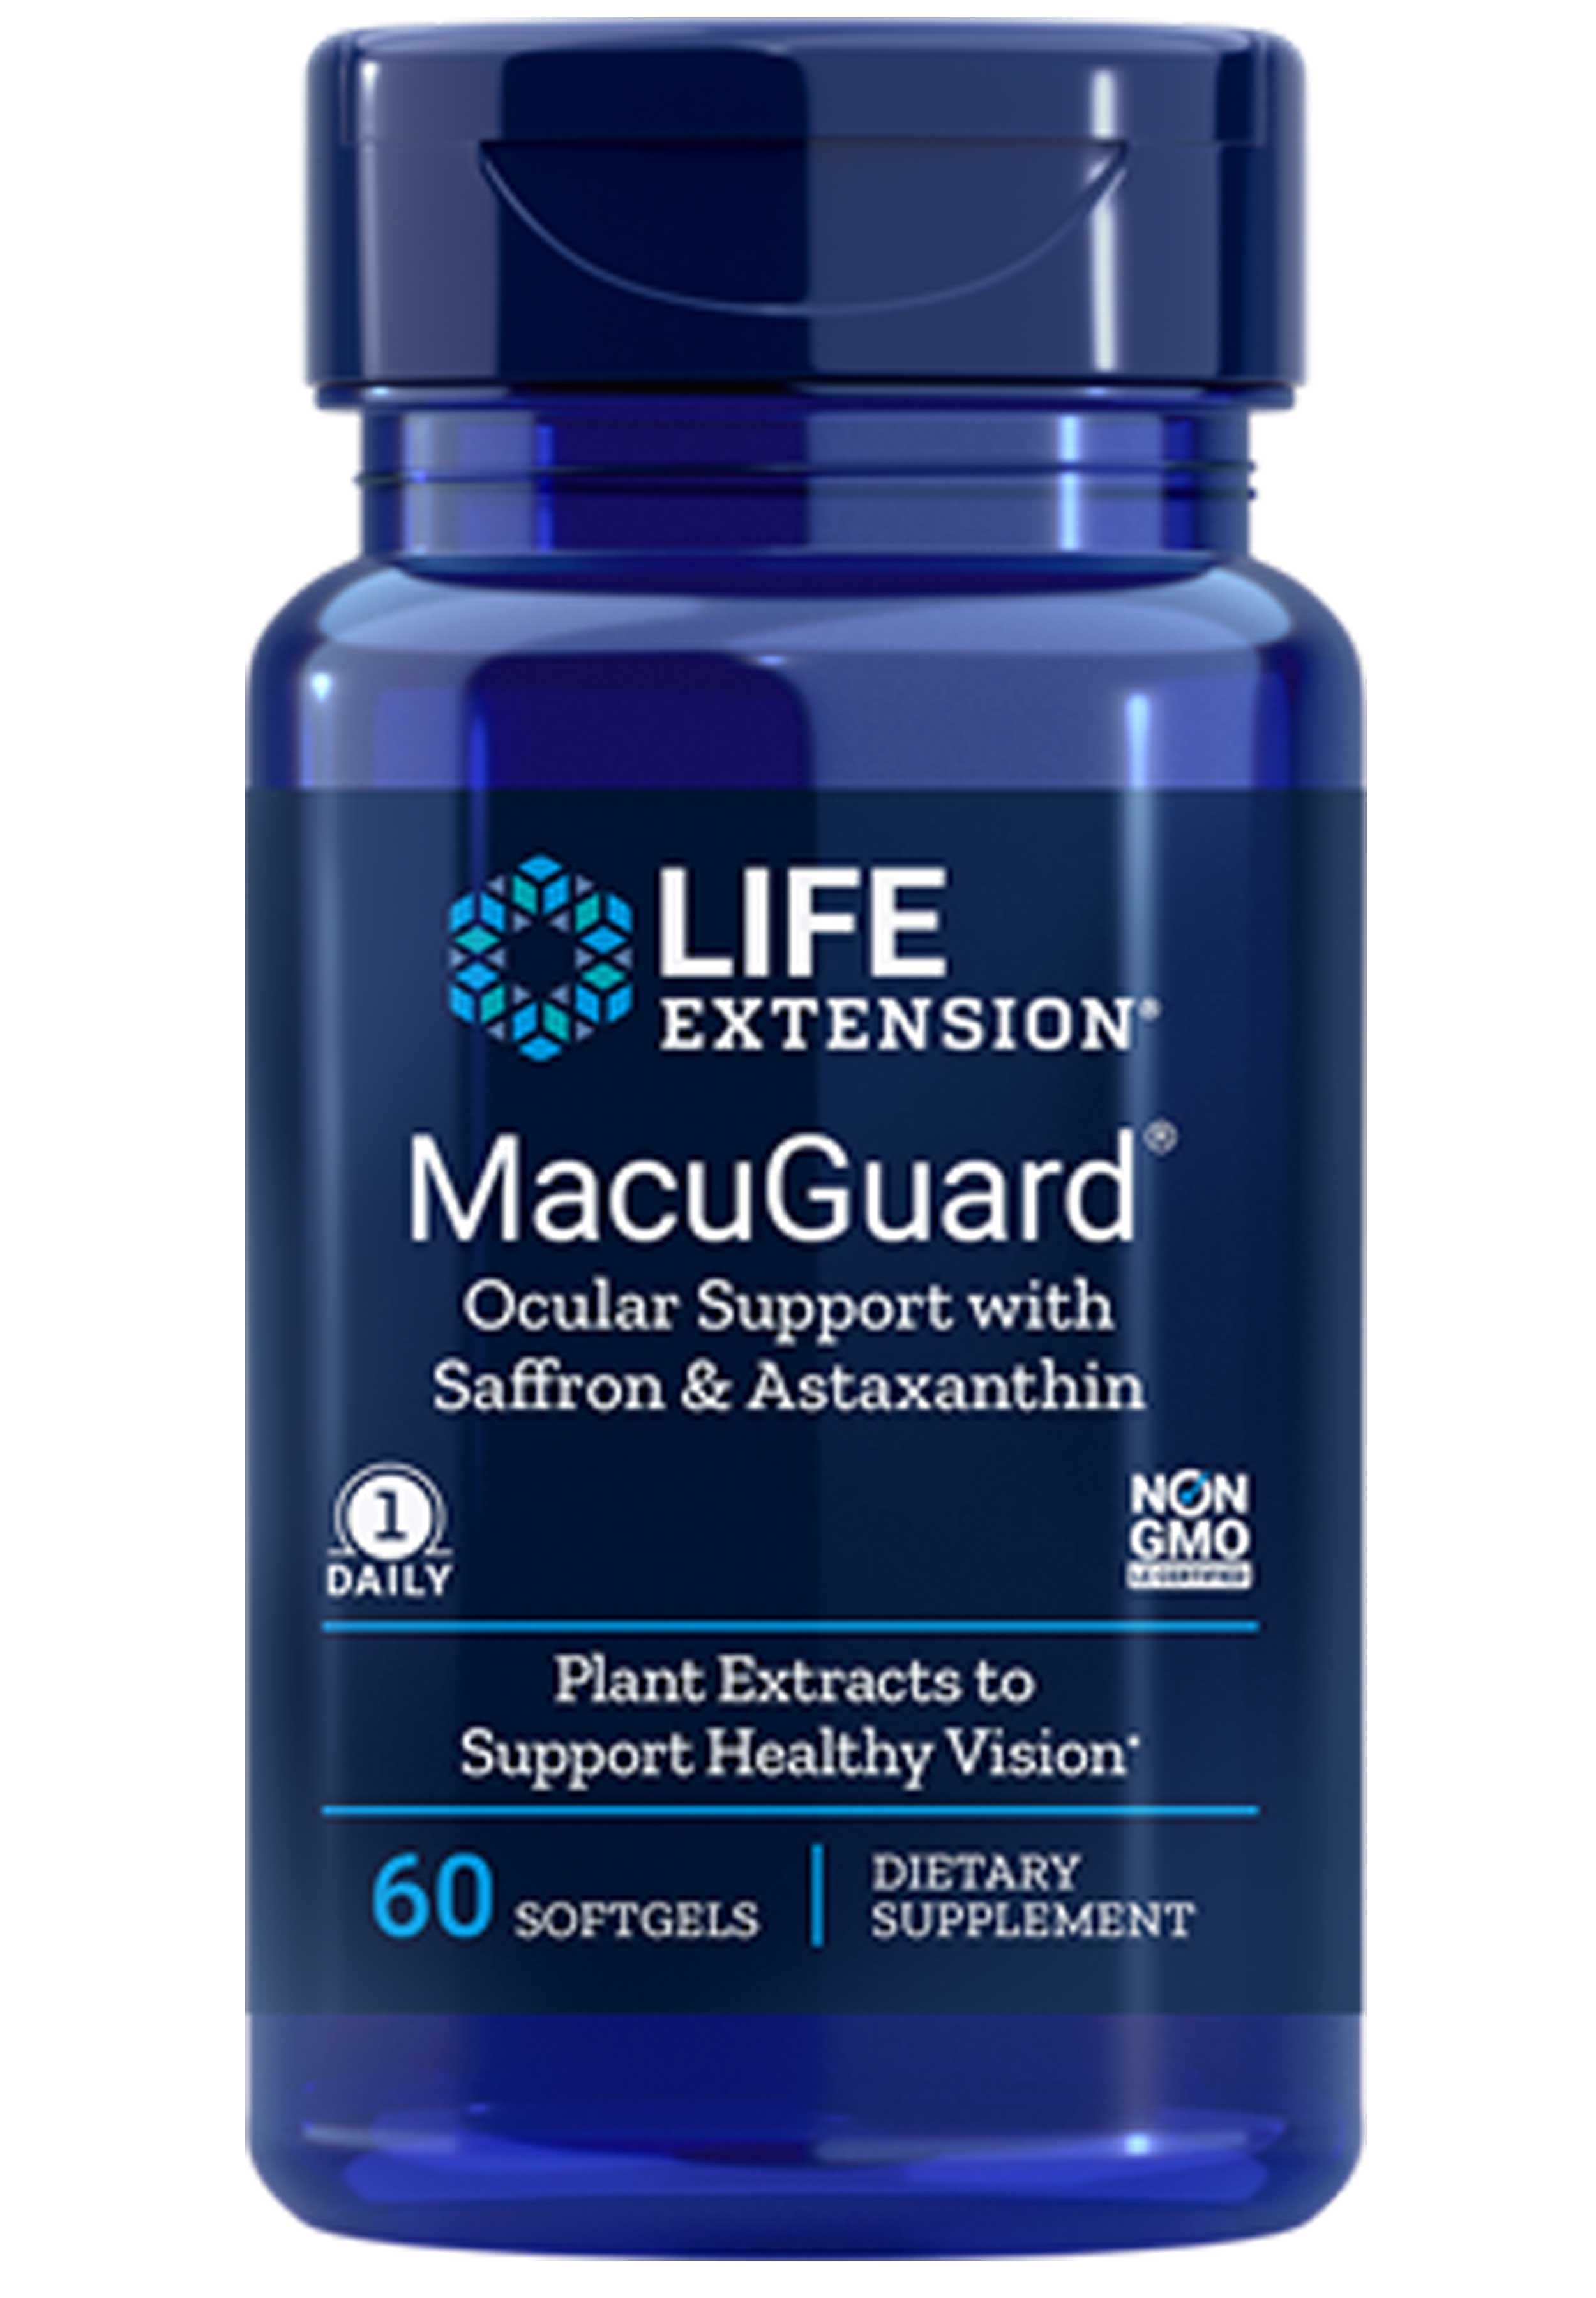 Life Extension MacuGuard Ocular Support with Saffron and Astaxanthin 